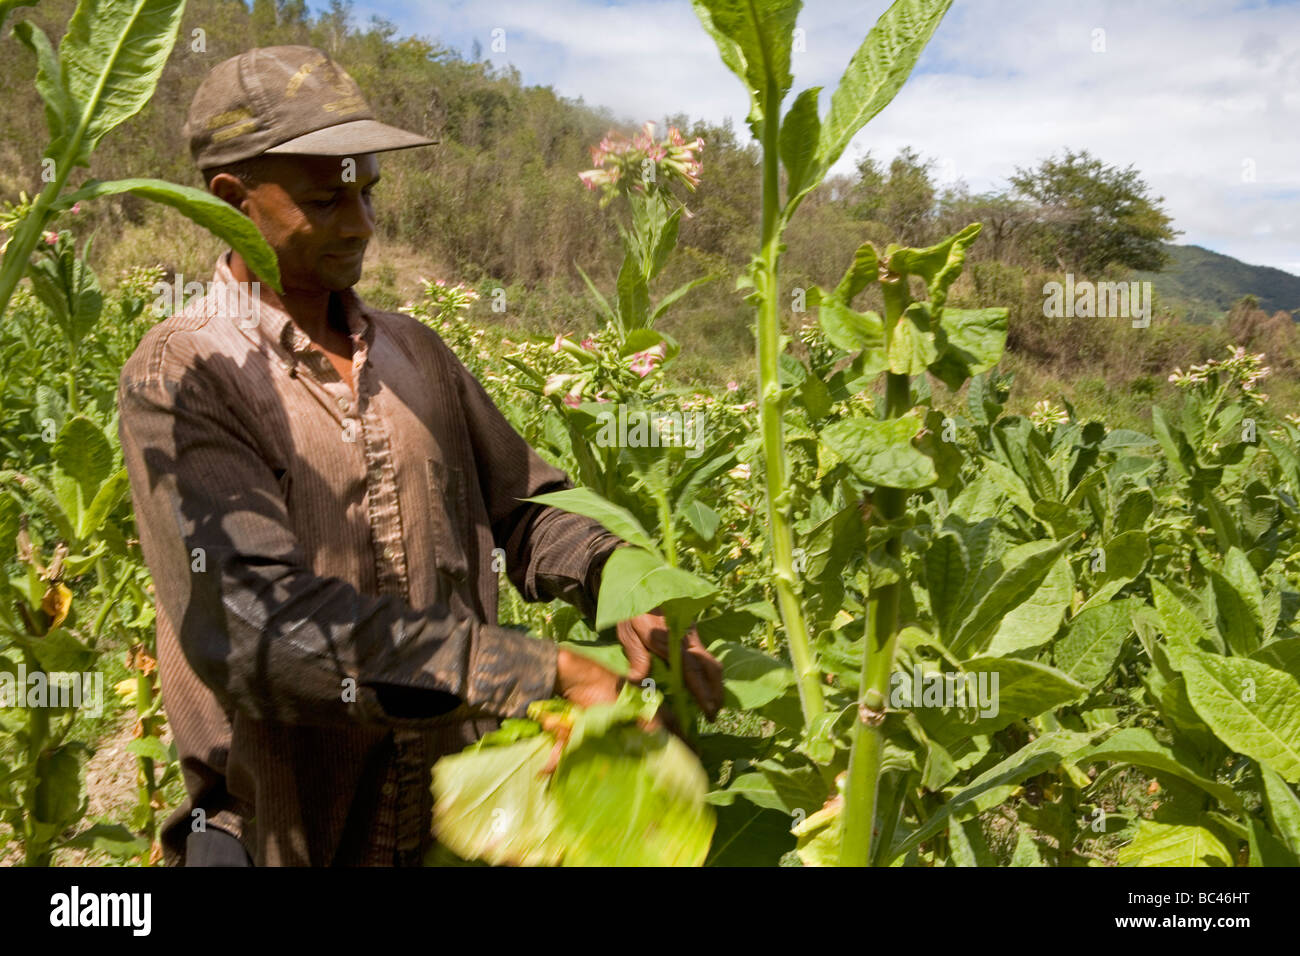 Dominican Republic - Centre - The Cibao - Tobacco Valley - Plantation - Picking up leaves Stock Photo